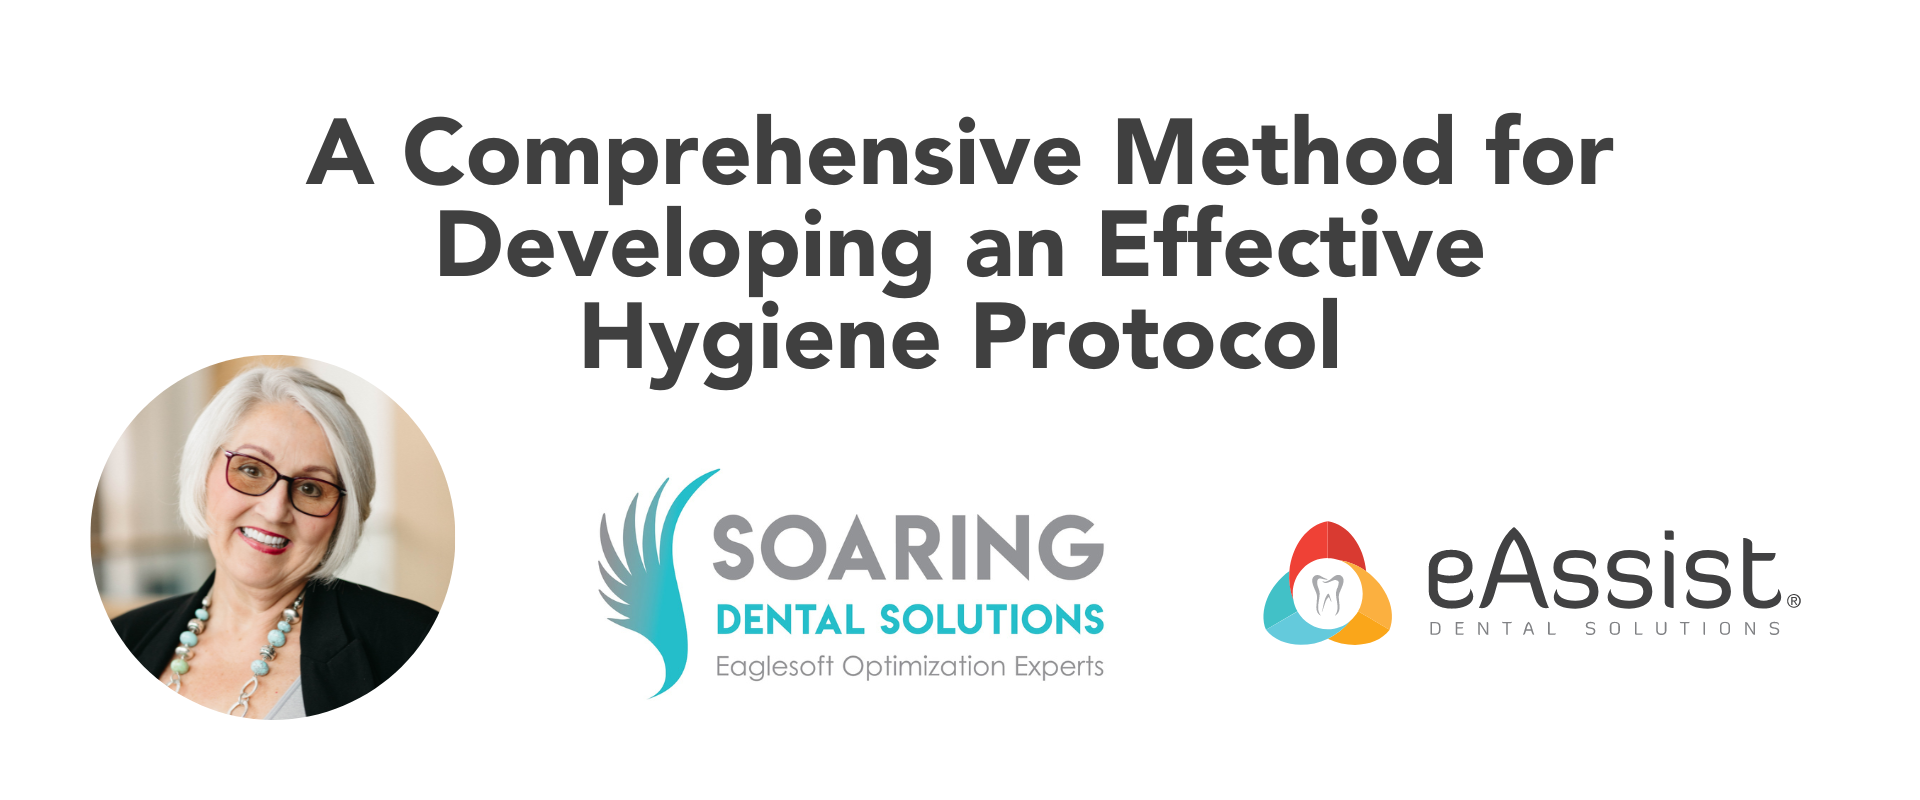 Enhancing Patient Care: A Comprehensive Method for Developing an Effective Hygiene Protocol